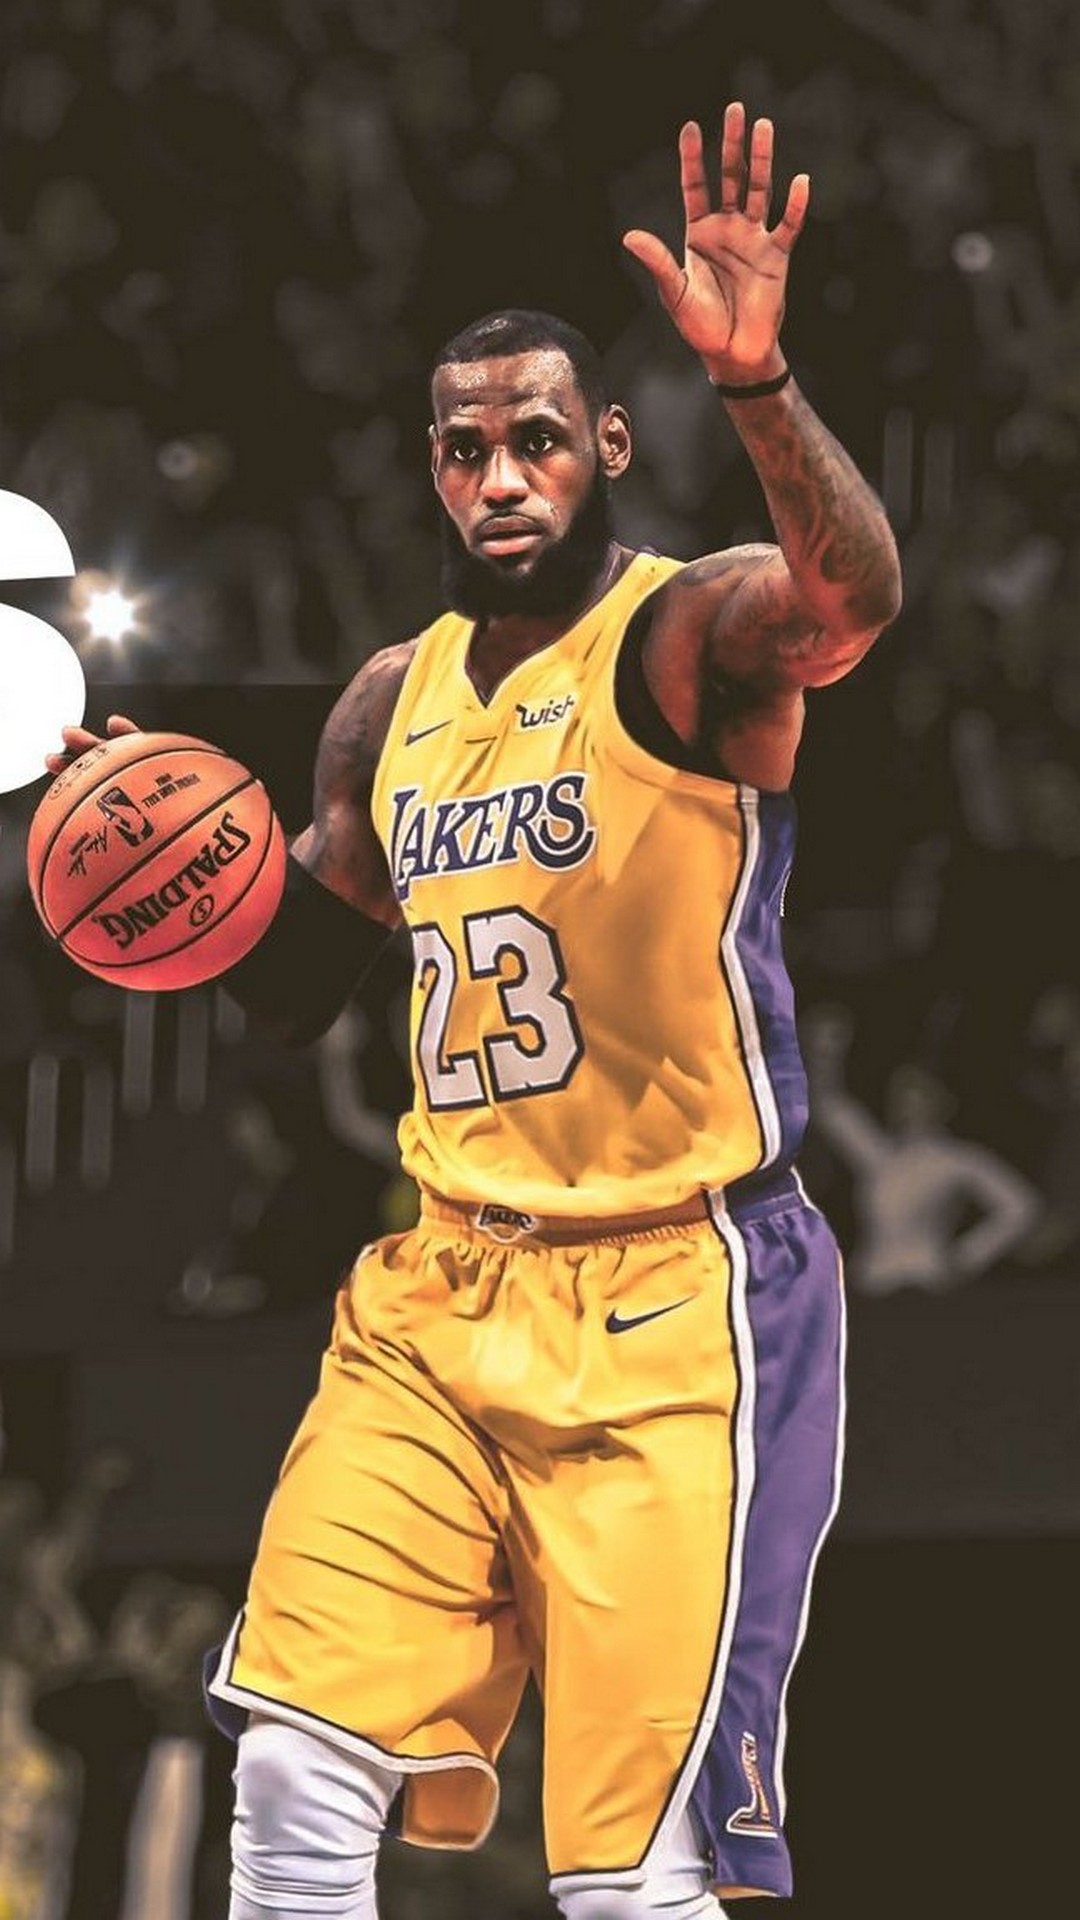 Mobile Wallpapers Lebron James Lakers With high-resolution 1080X1920 pixel. You can use this wallpaper for your iPhone 5, 6, 7, 8, X backgrounds, Mobile Screensaver, or iPad Lock Screen